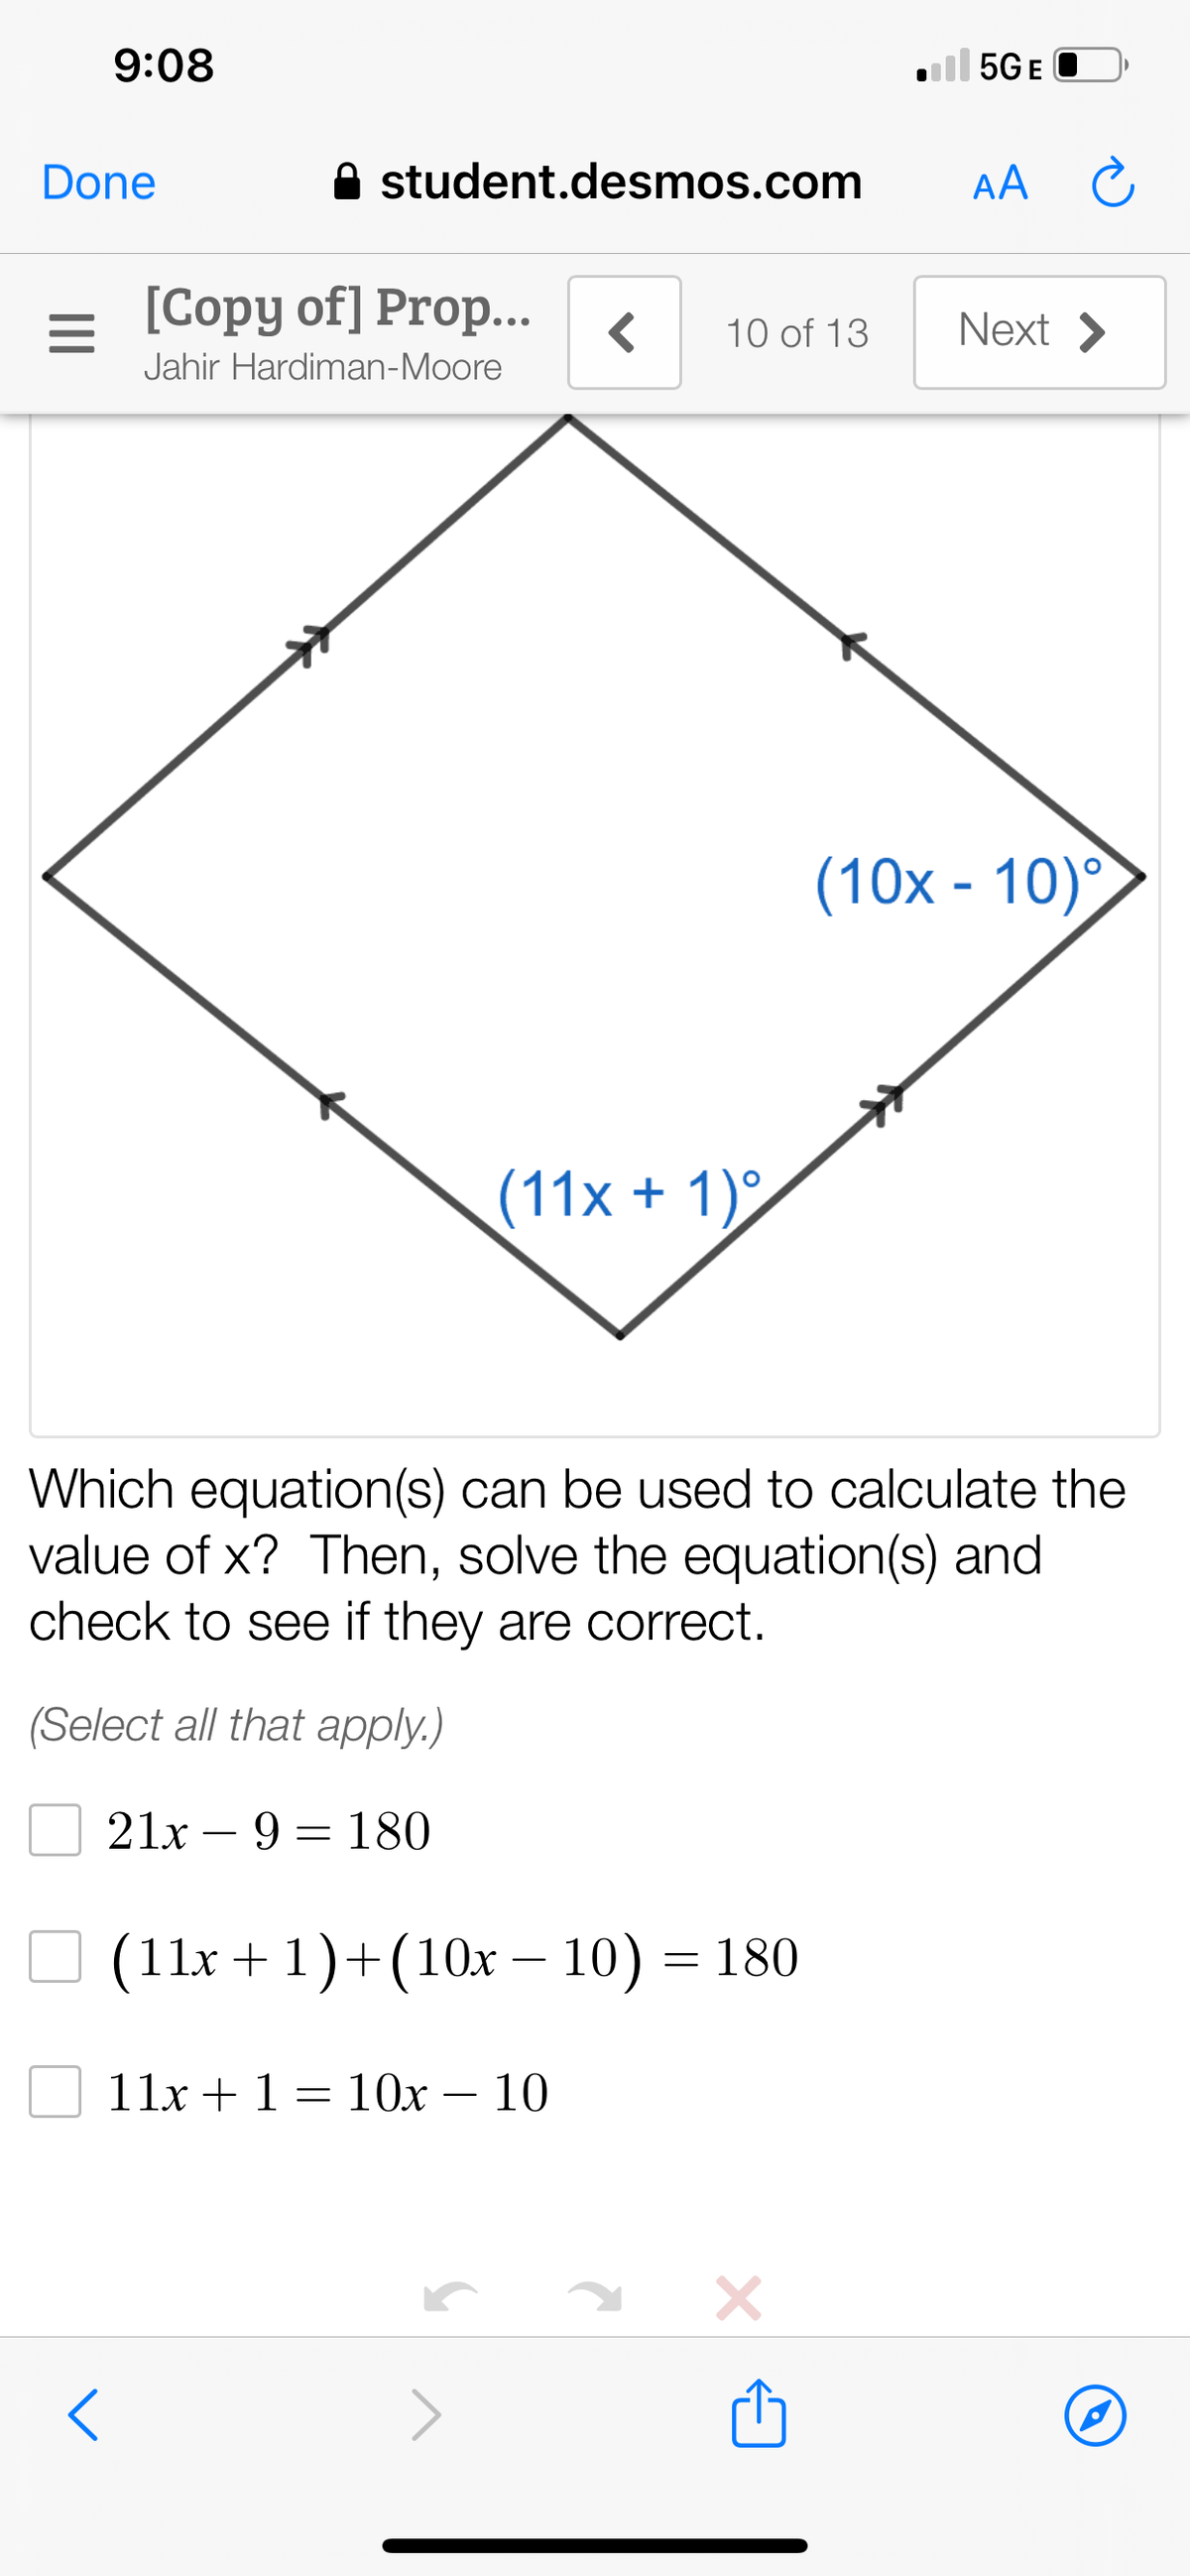 9:08
ll 5GE
Done
A student.desmos.com
AA
[Copy of] Prop..
Next >
10 of 13
Jahir Hardiman-Moore
(10x - 10)°
(11x + 1)°
Which equation(s) can be used to calculate the
value of x? Then, solve the equation(s) and
check to see if they are correct.
(Select all that apply.)
21x – 9 = 180
O (11x + 1)+(10x – 10) = 180
-
11x +1 = 10x – 10
-
>
